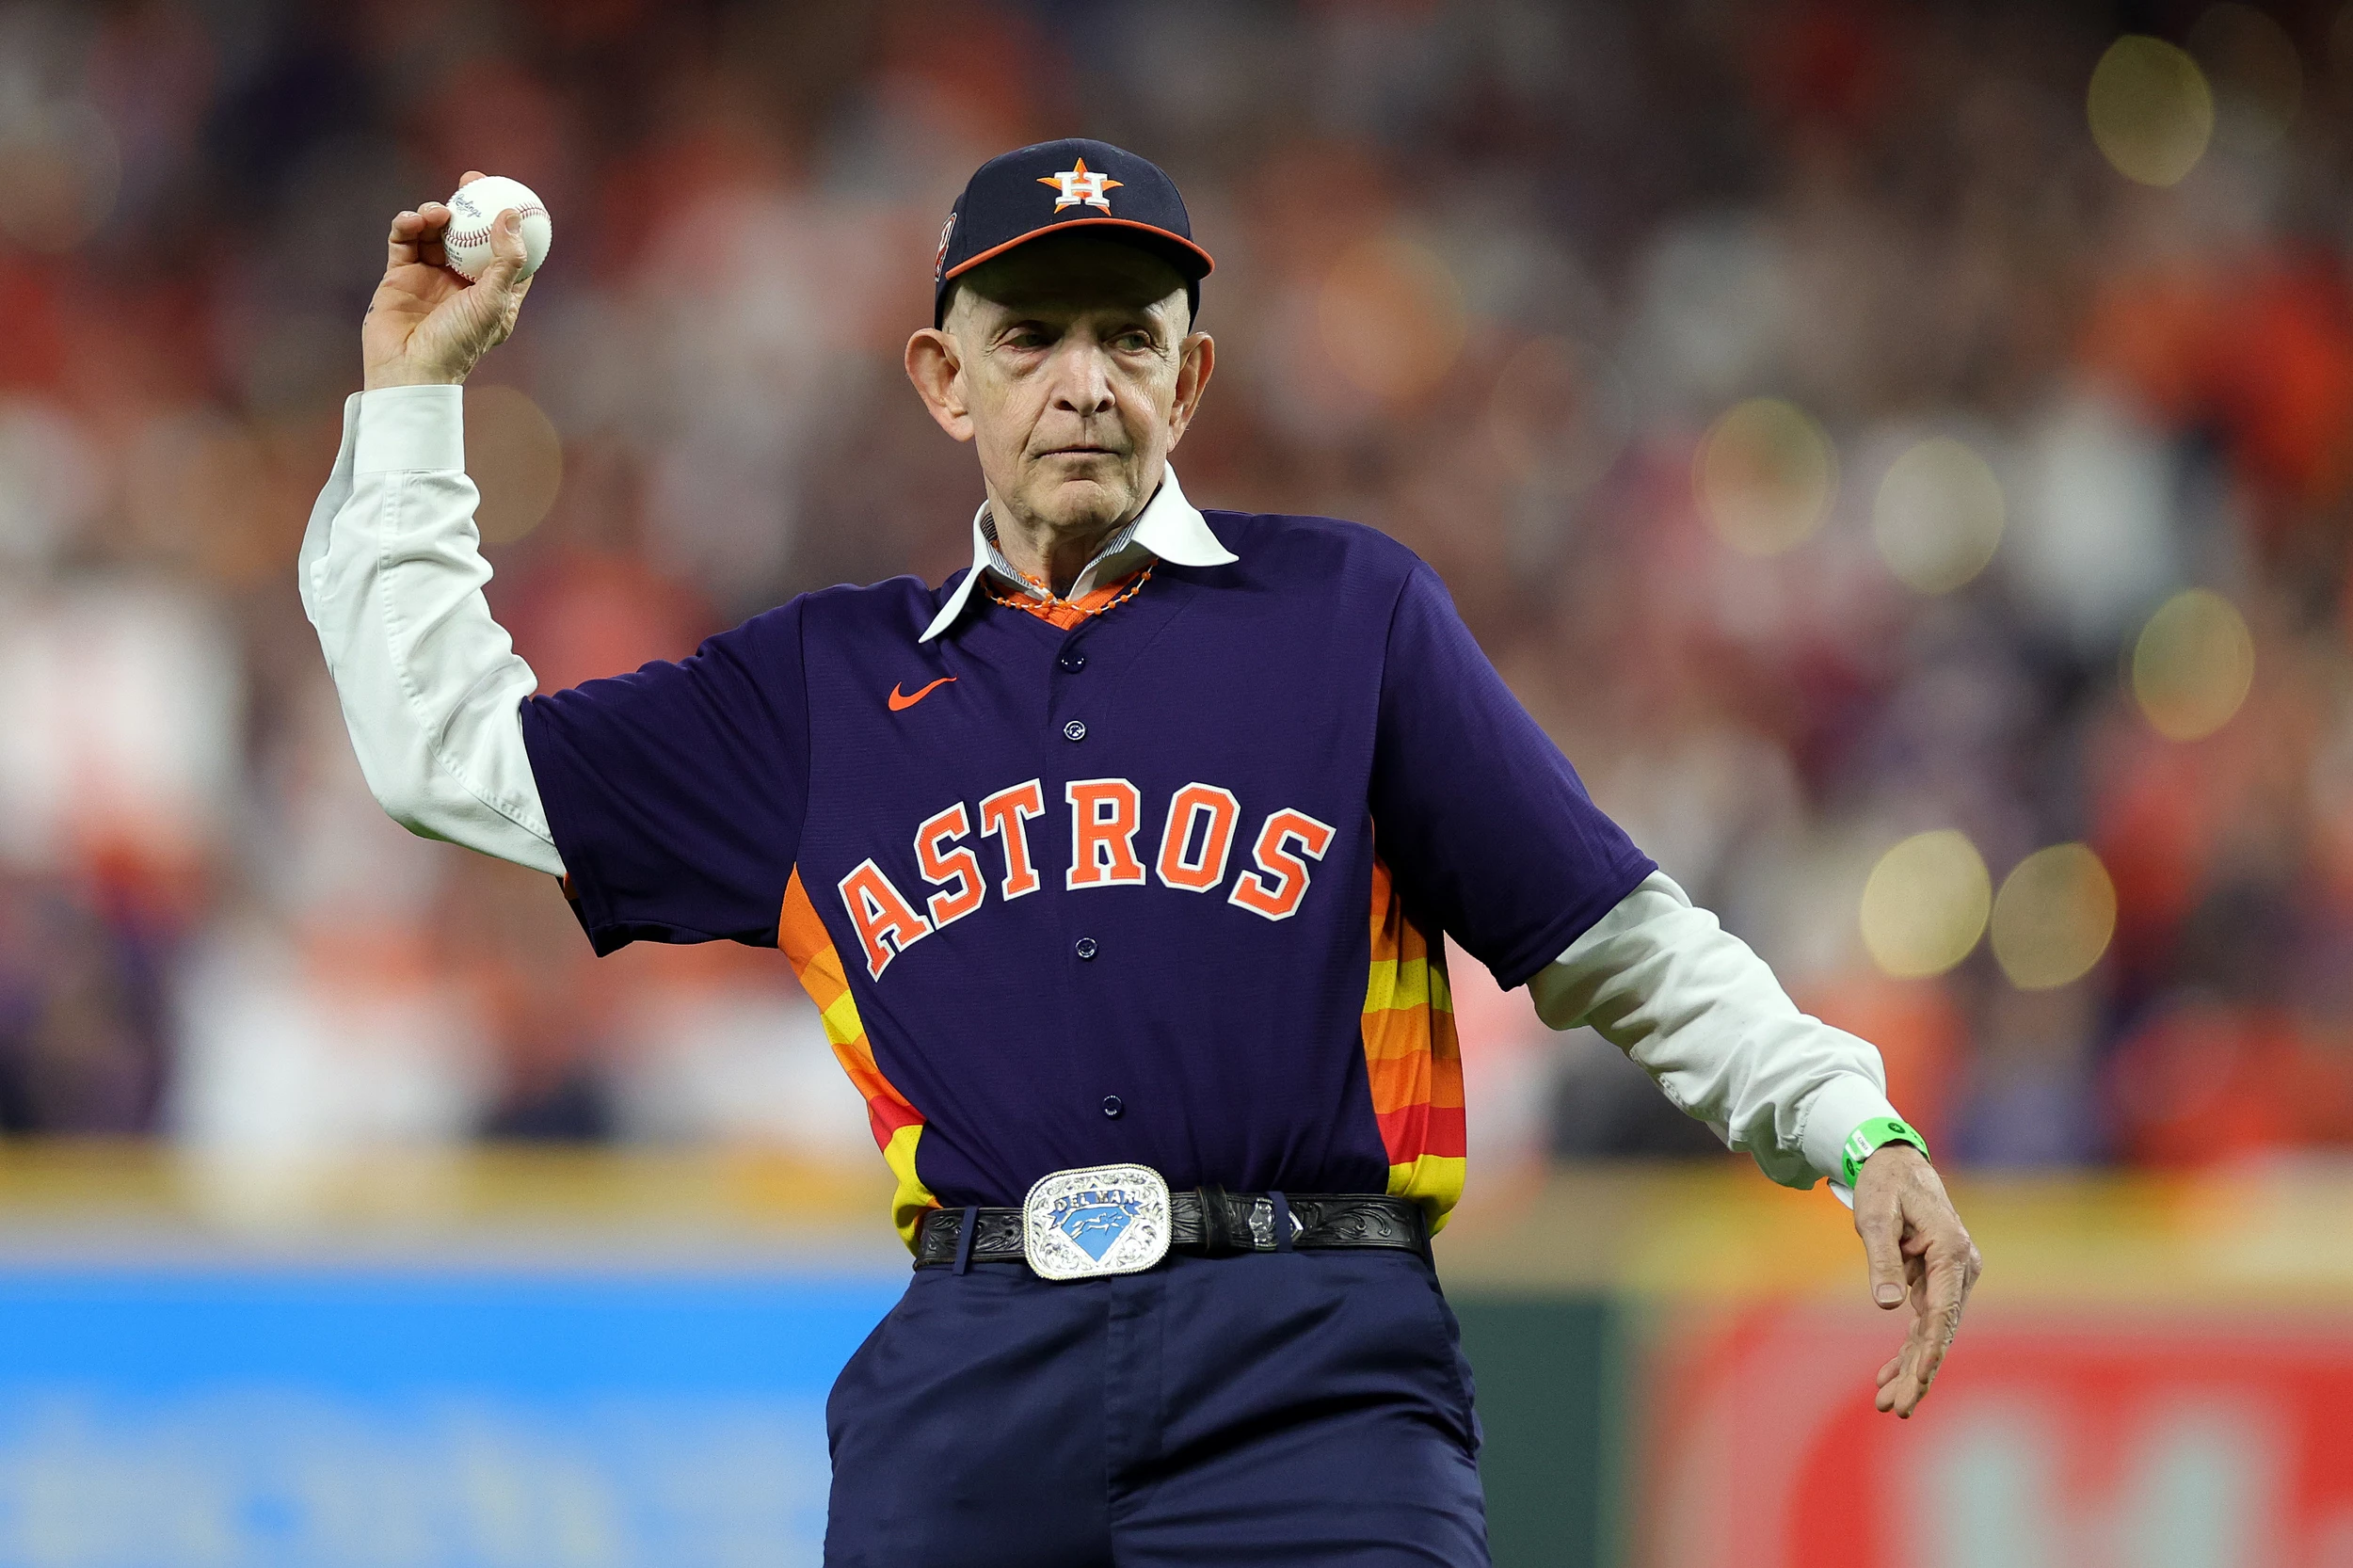 Mattress Mack's Astros promotion is Gallery's biggest as Houston